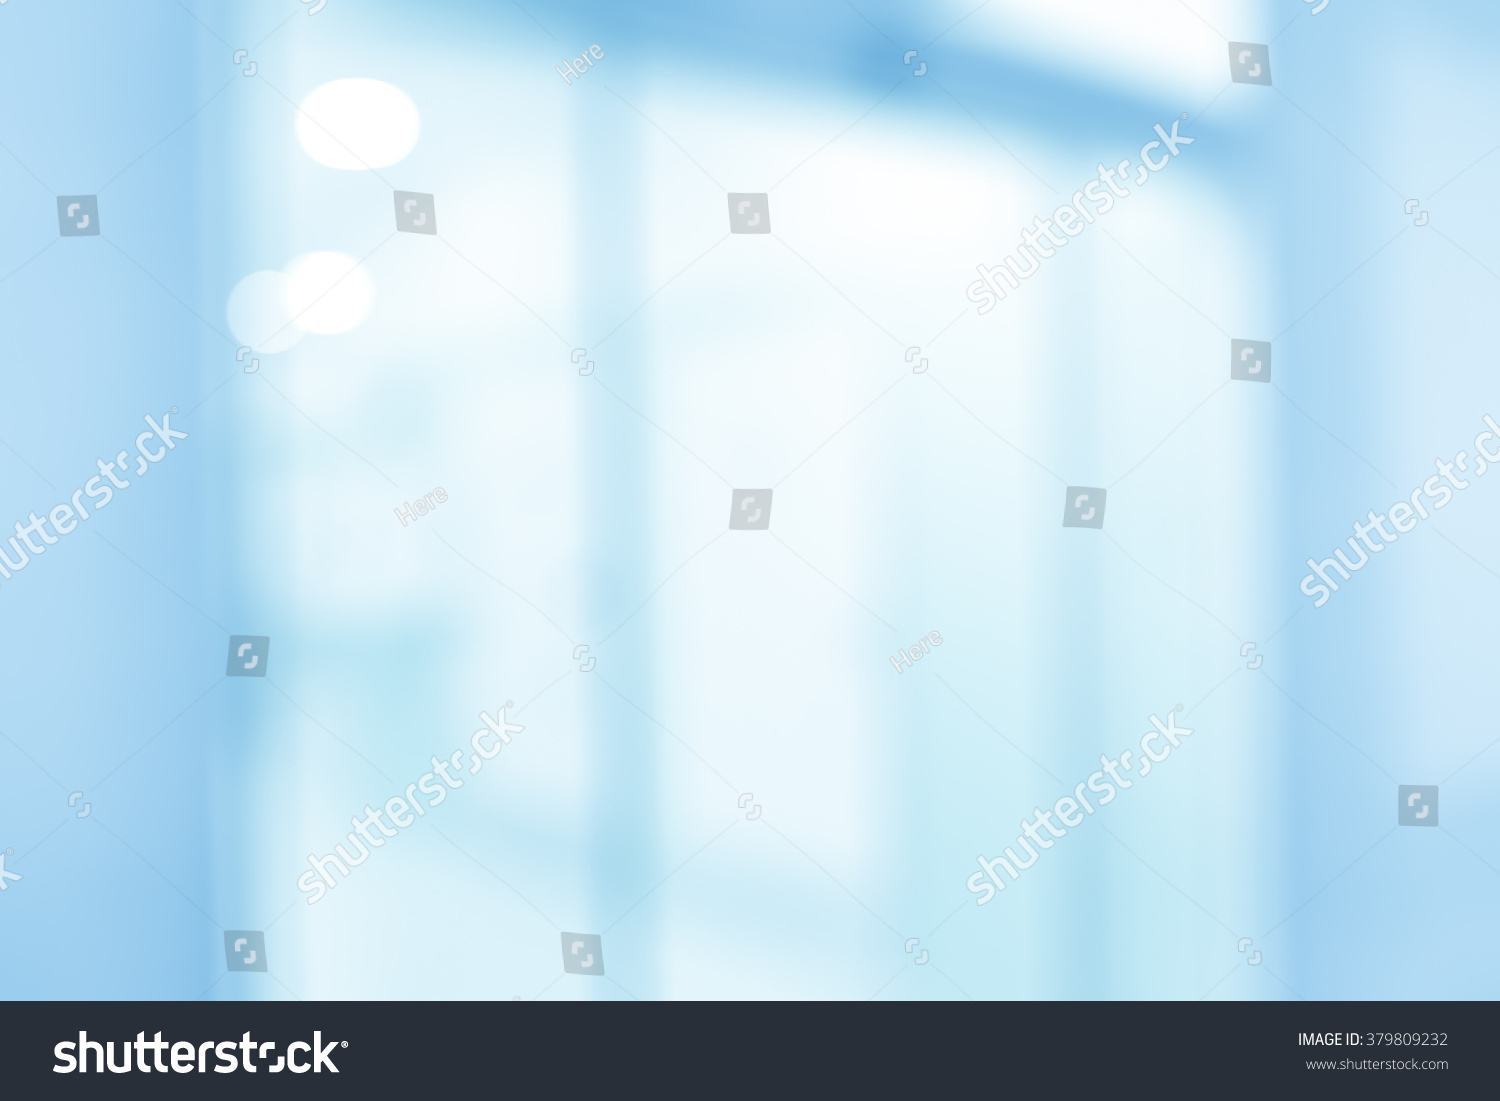 BLURRED OFFICE BACKGROUND #379809232